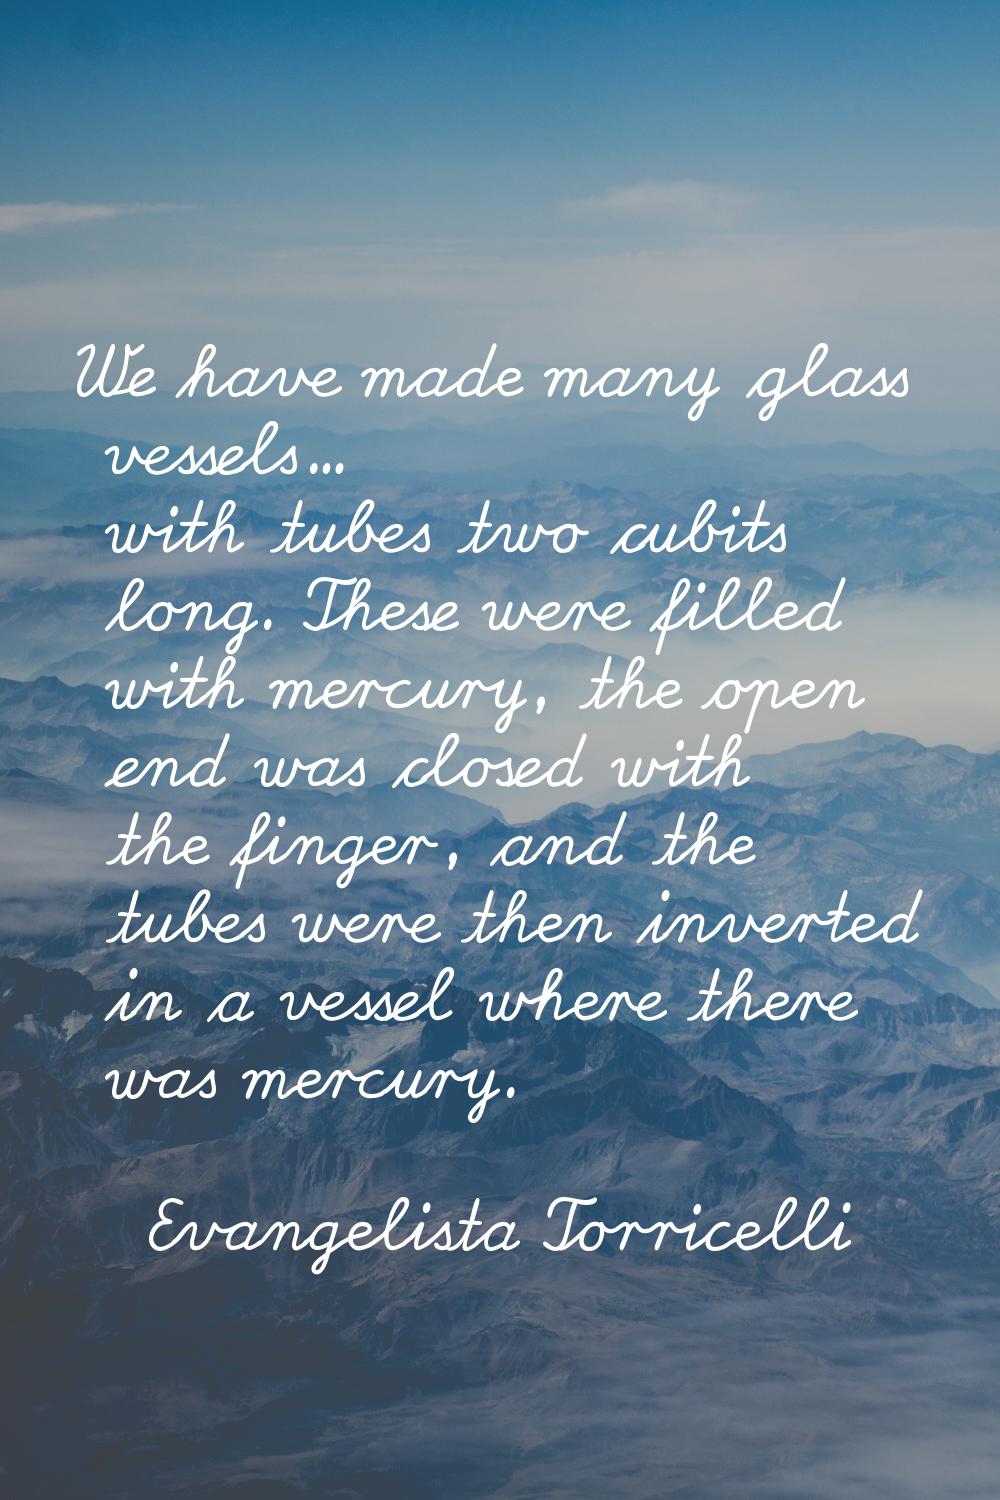 We have made many glass vessels... with tubes two cubits long. These were filled with mercury, the 